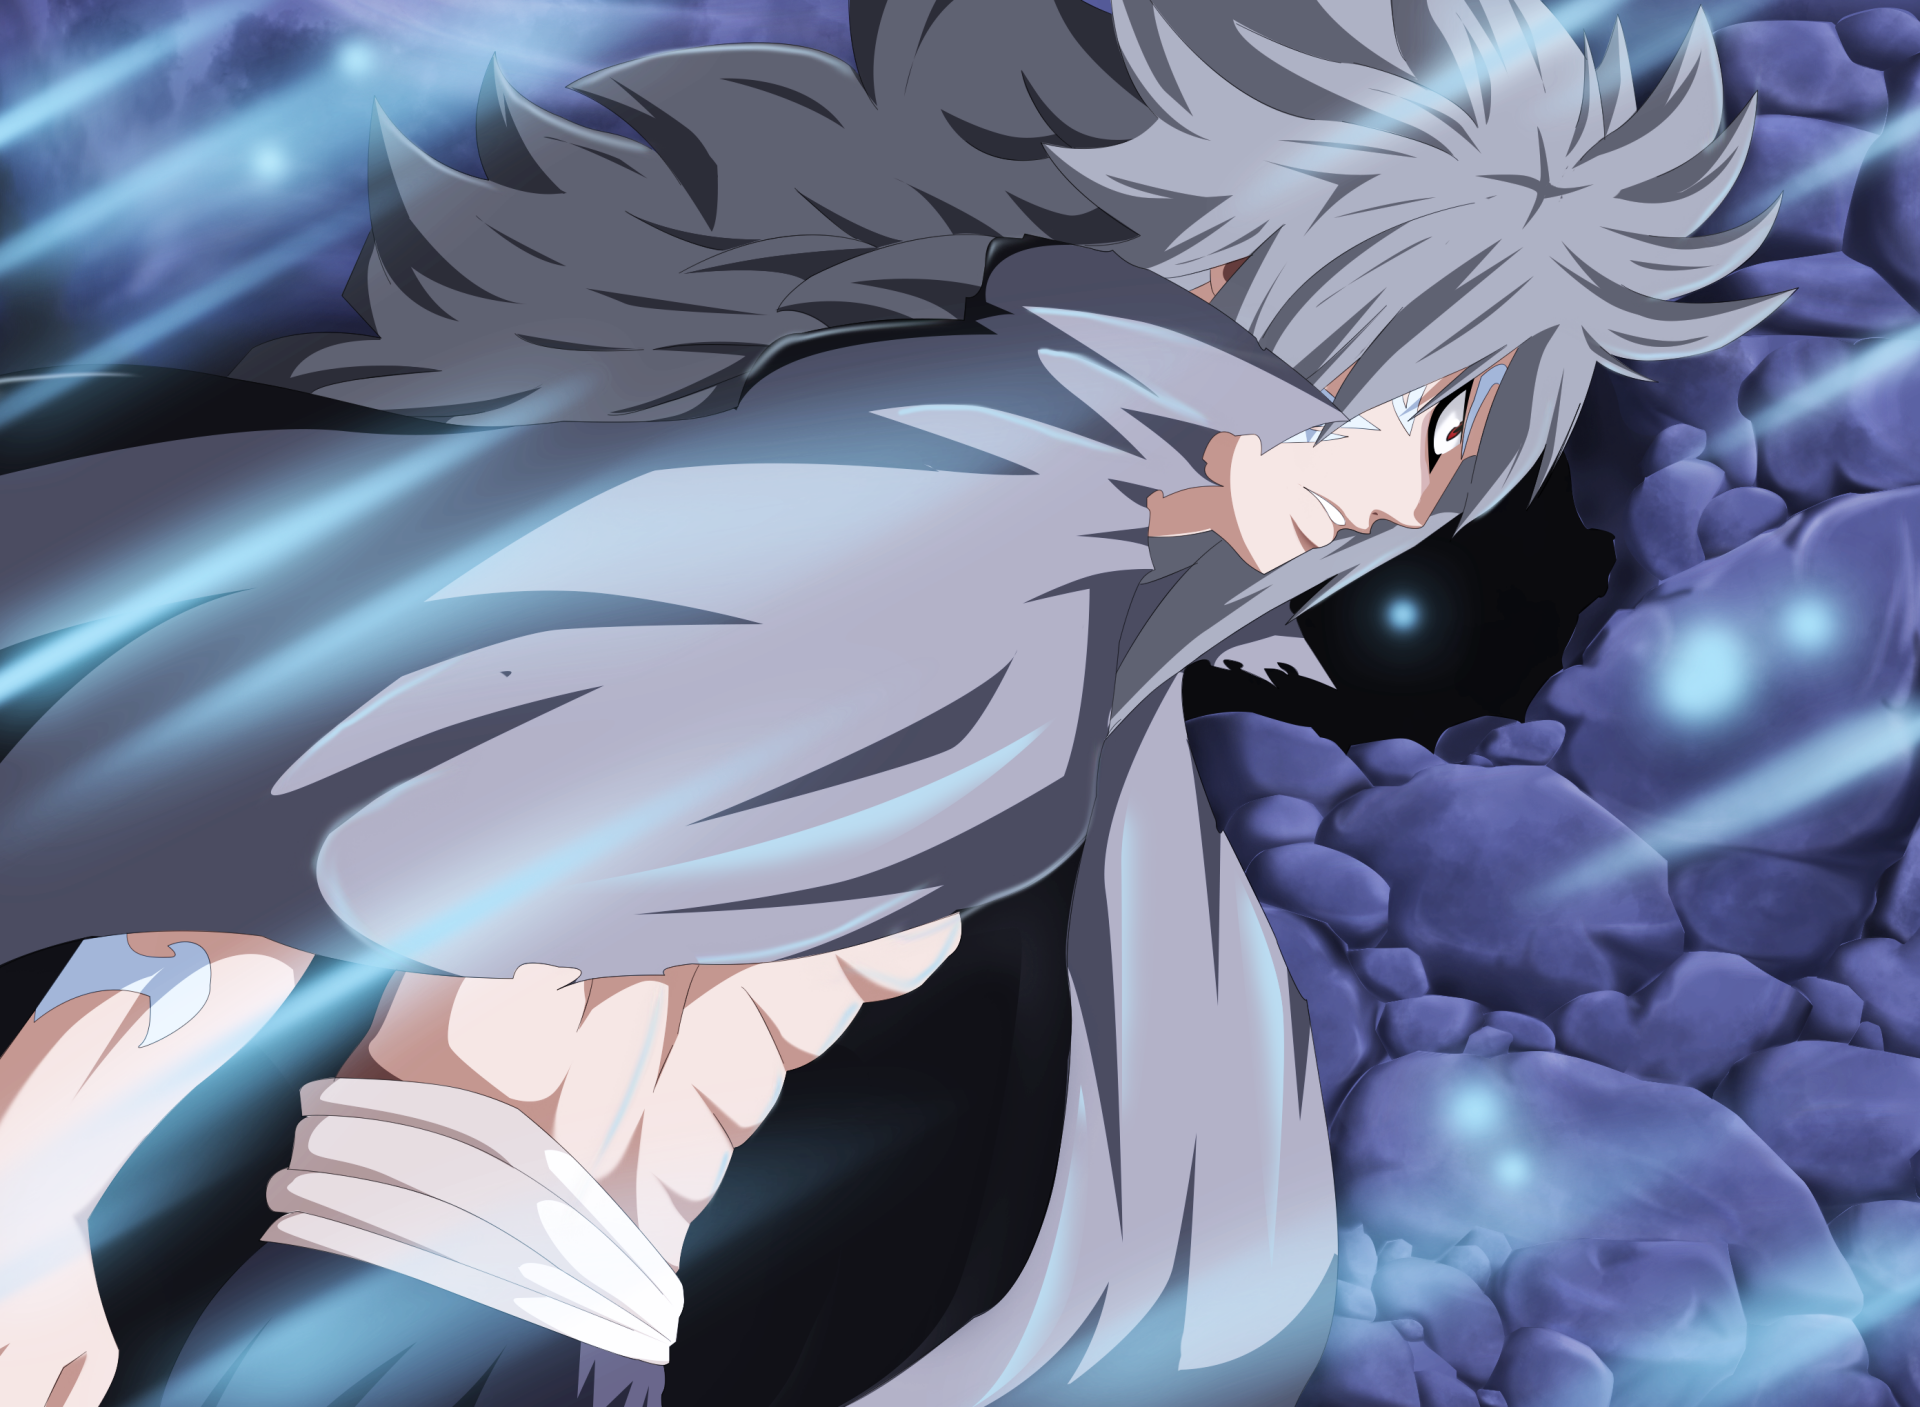 Download Acnologia (Fairy Tail) Anime Fairy Tail  HD Wallpaper by Maxibostero